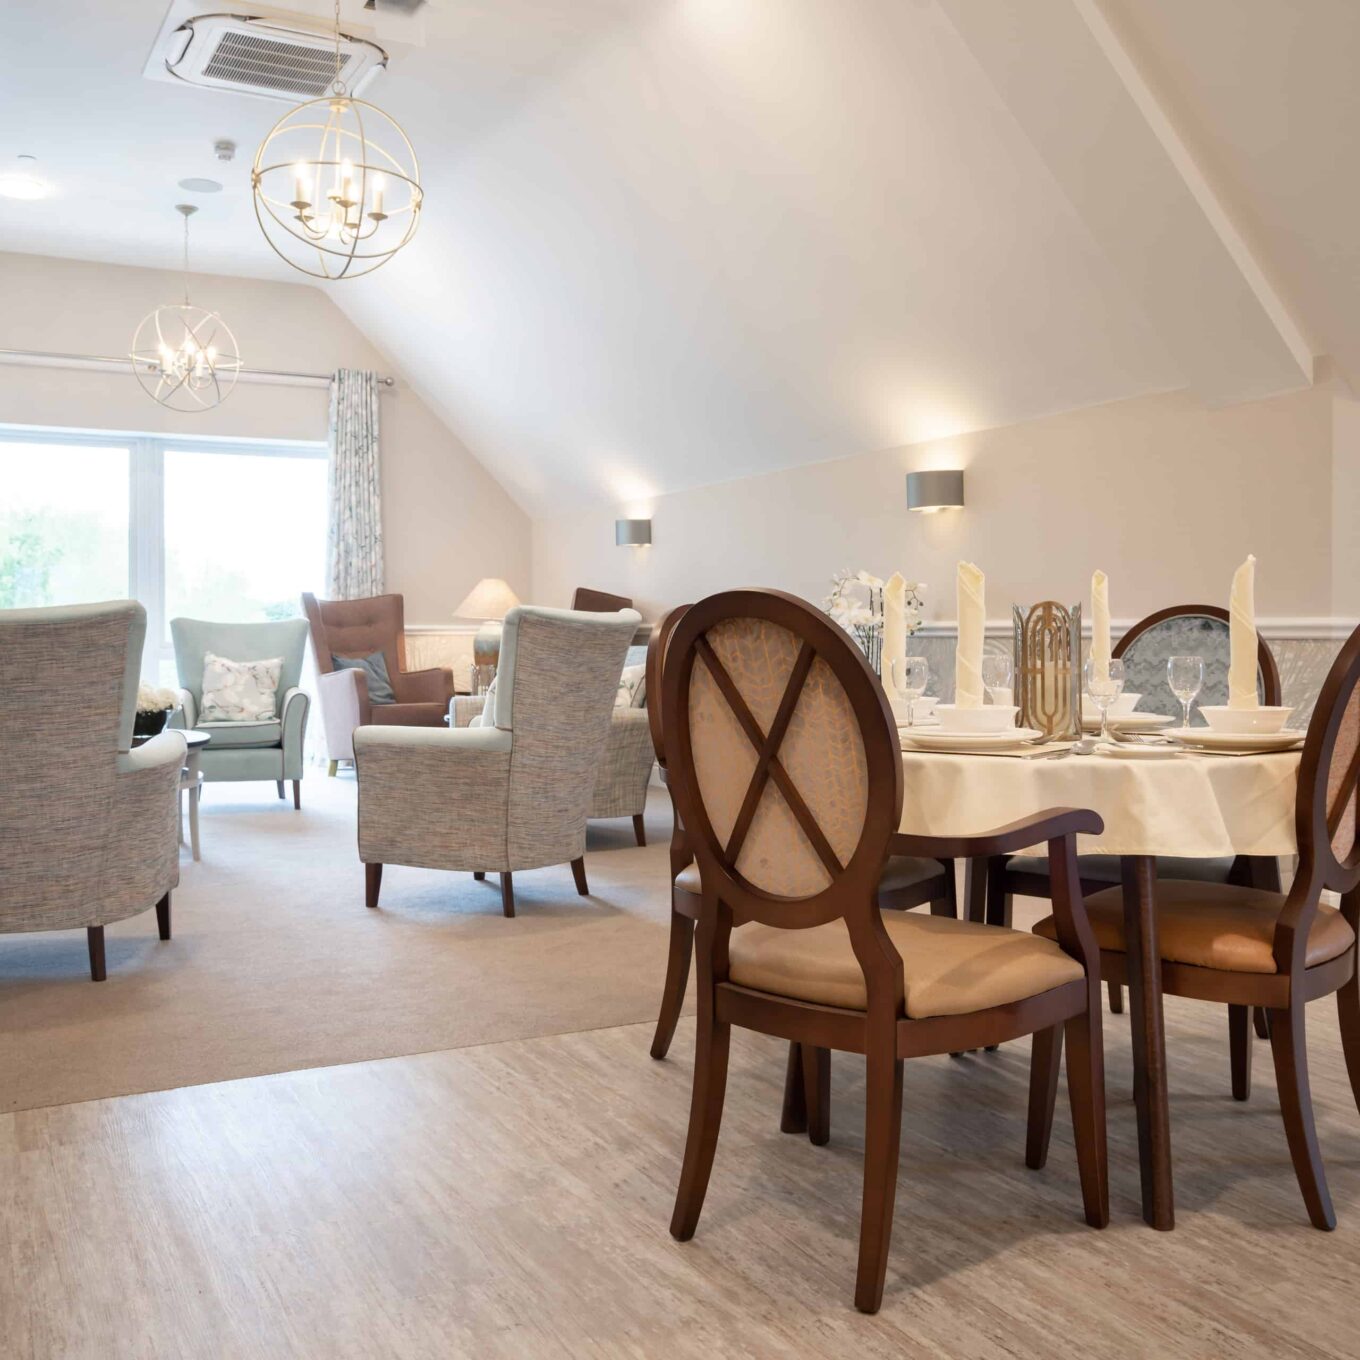 Dining and seating area at Oakland Care Home in Wantage